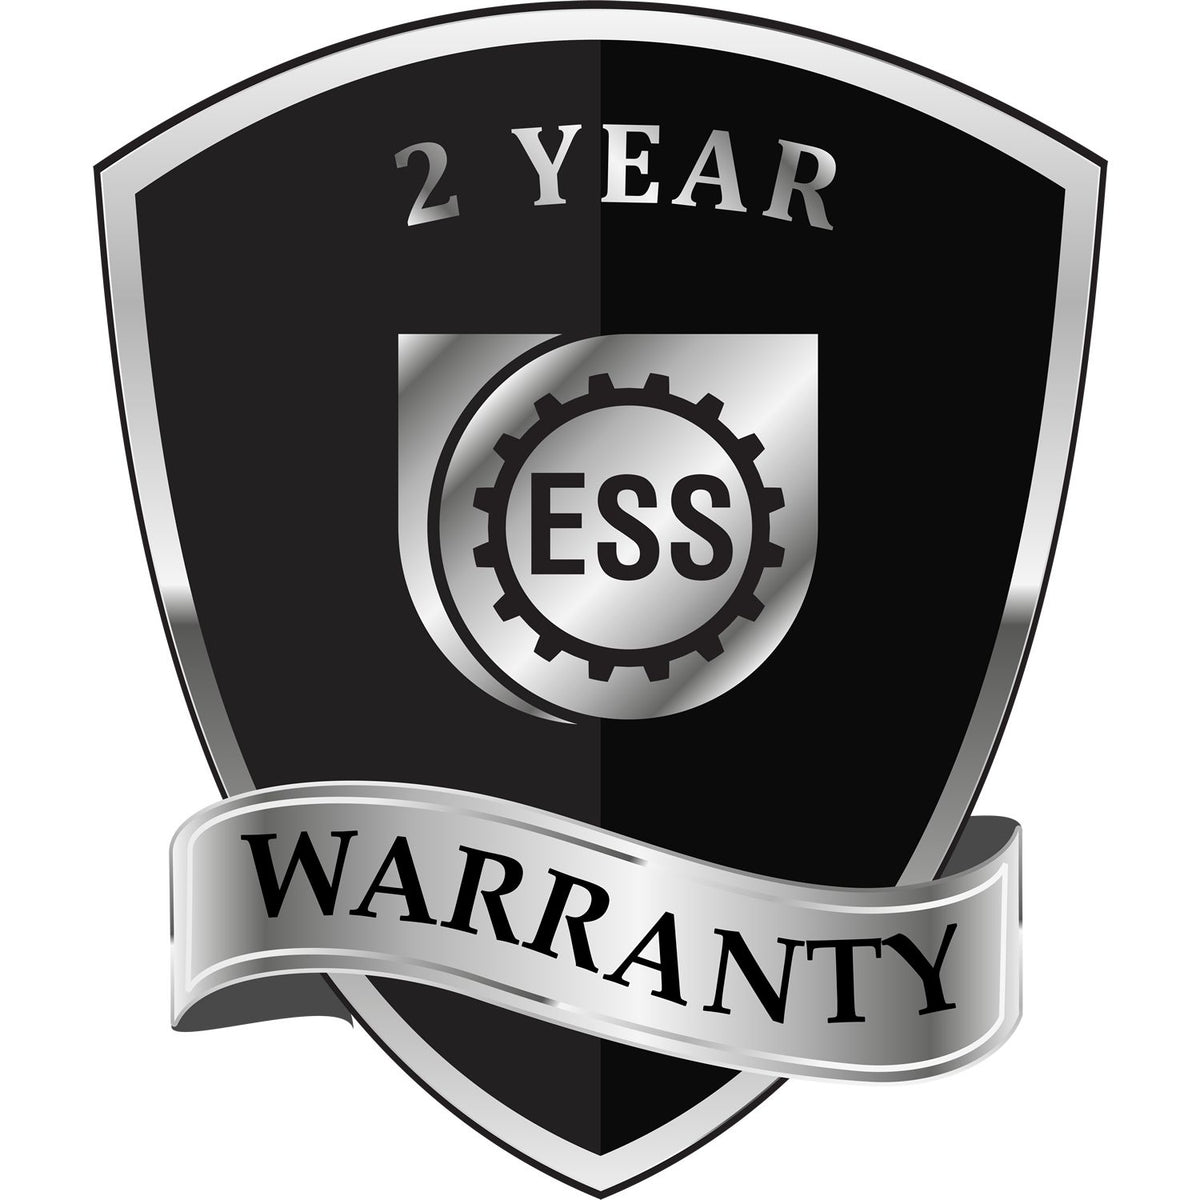 A badge or emblem showing a warranty icon for the Heavy Duty Cast Iron Arkansas Land Surveyor Seal Embosser